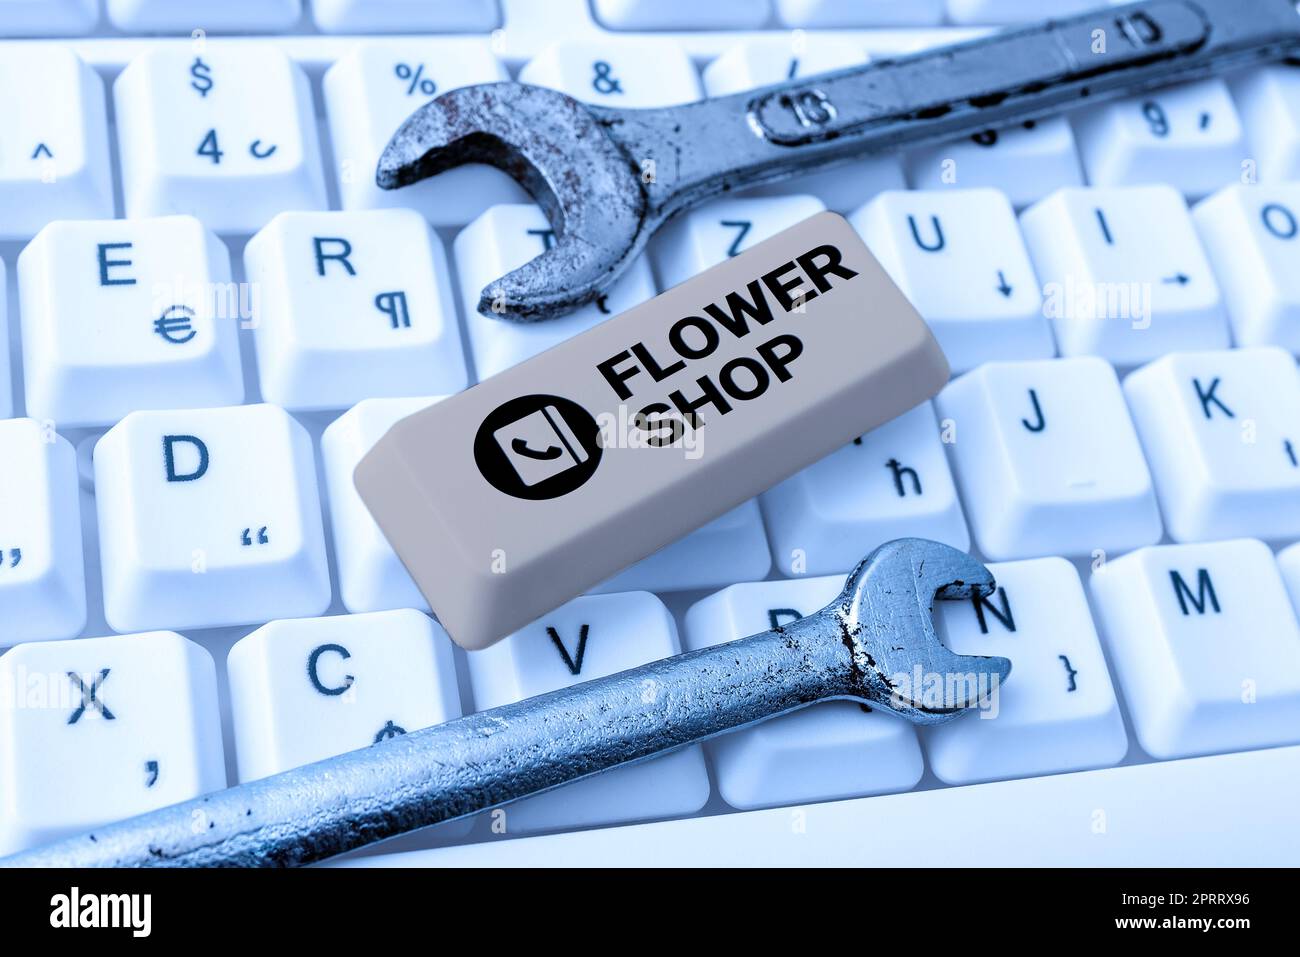 Conceptual caption Flower Shop. Business overview where cut flowers are sold with decorations for gifts Stock Photo